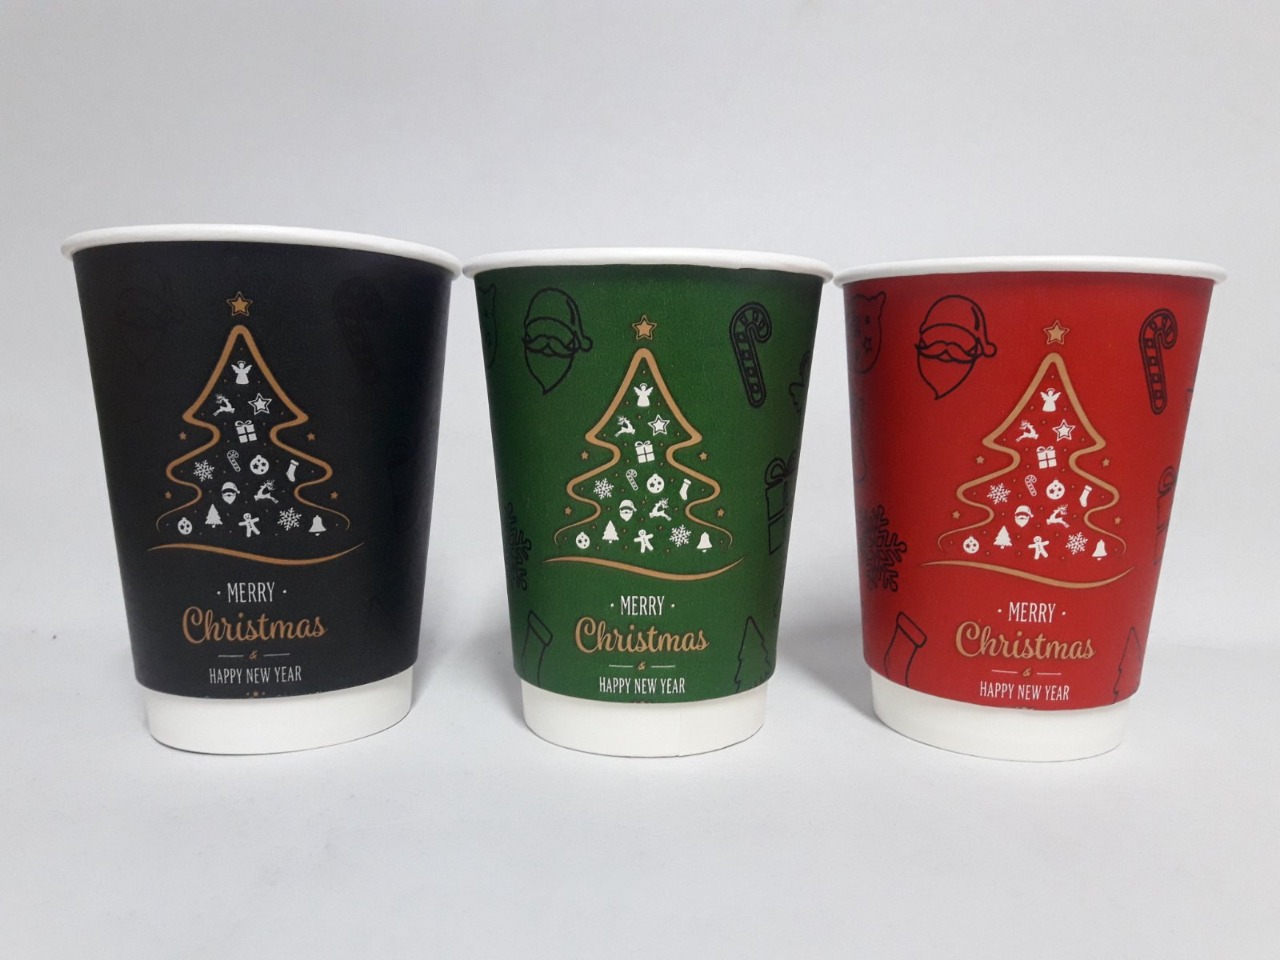 8oz double wall paper cups